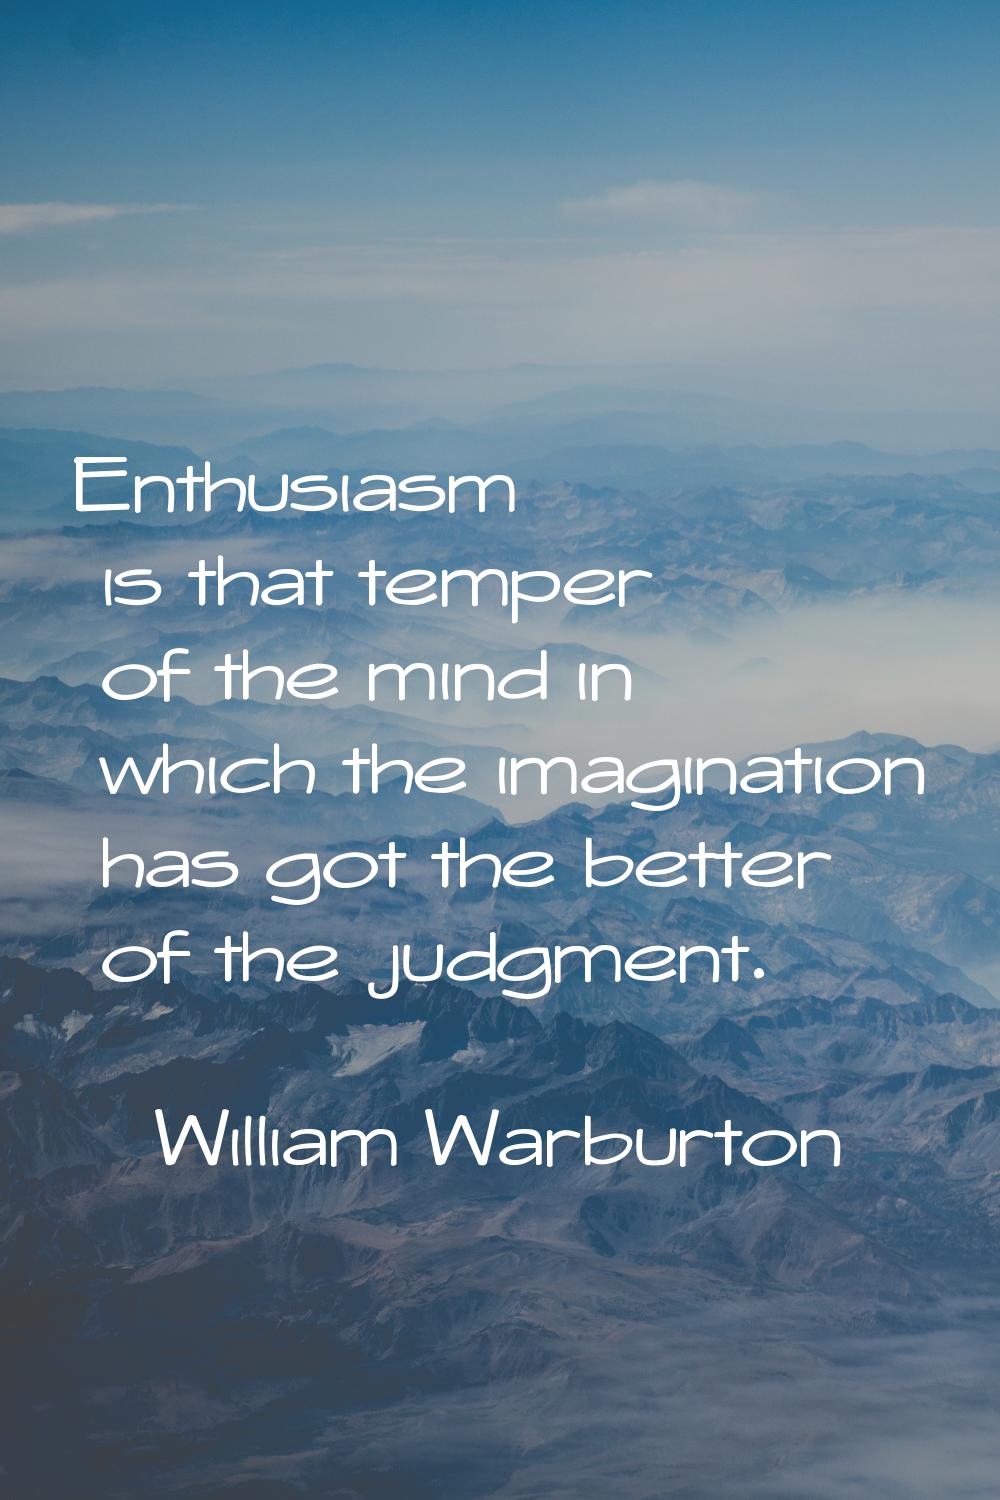 Enthusiasm is that temper of the mind in which the imagination has got the better of the judgment.